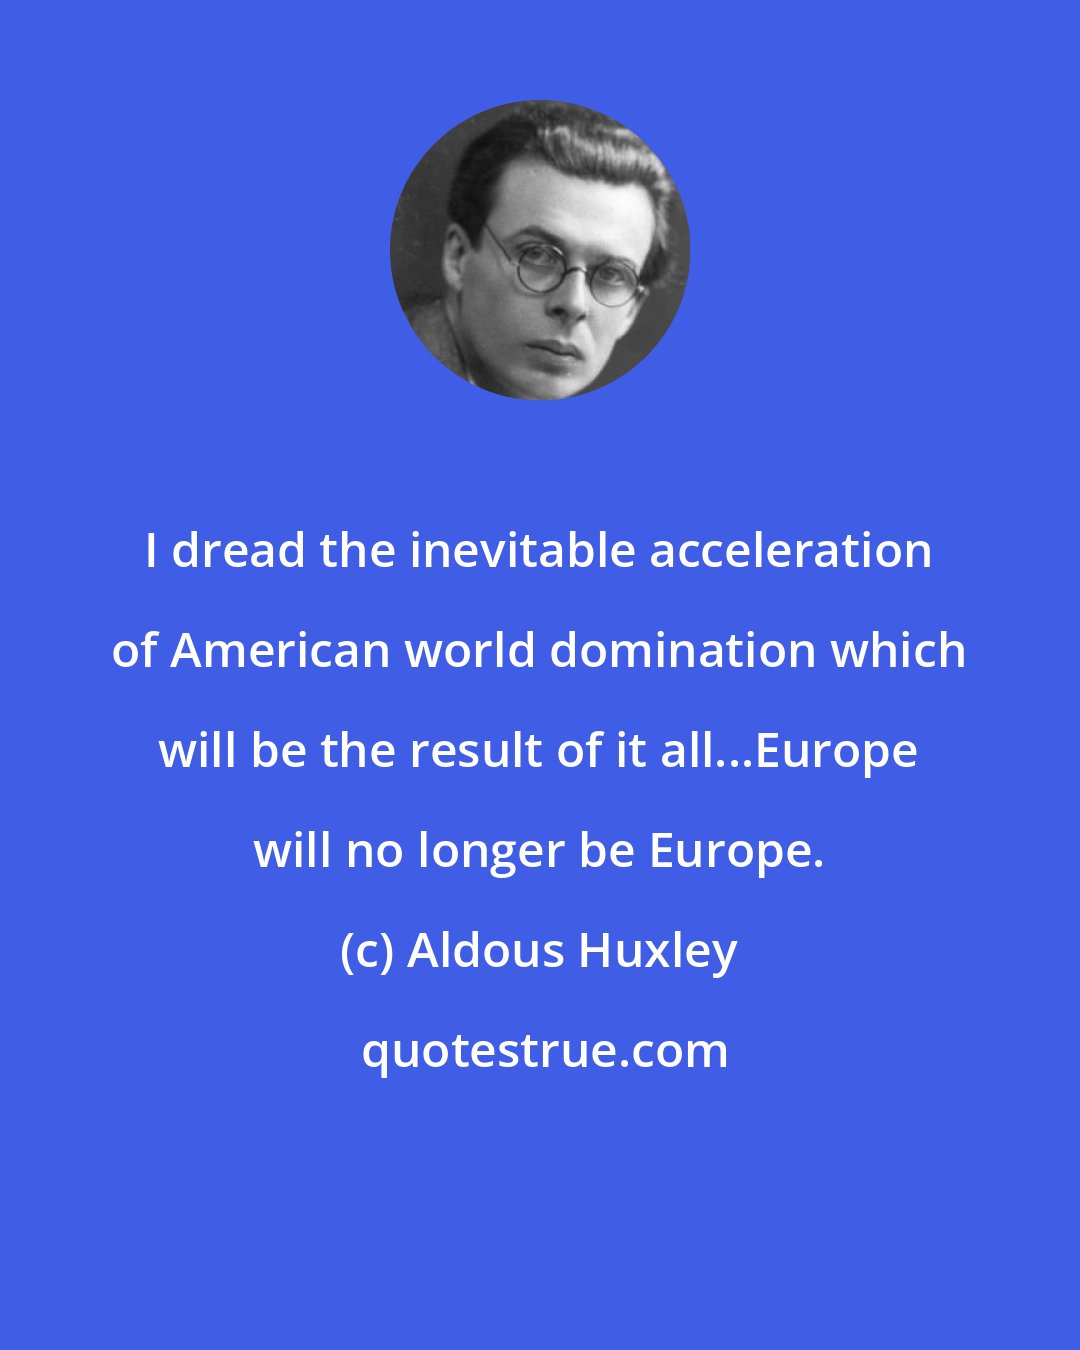 Aldous Huxley: I dread the inevitable acceleration of American world domination which will be the result of it all...Europe will no longer be Europe.